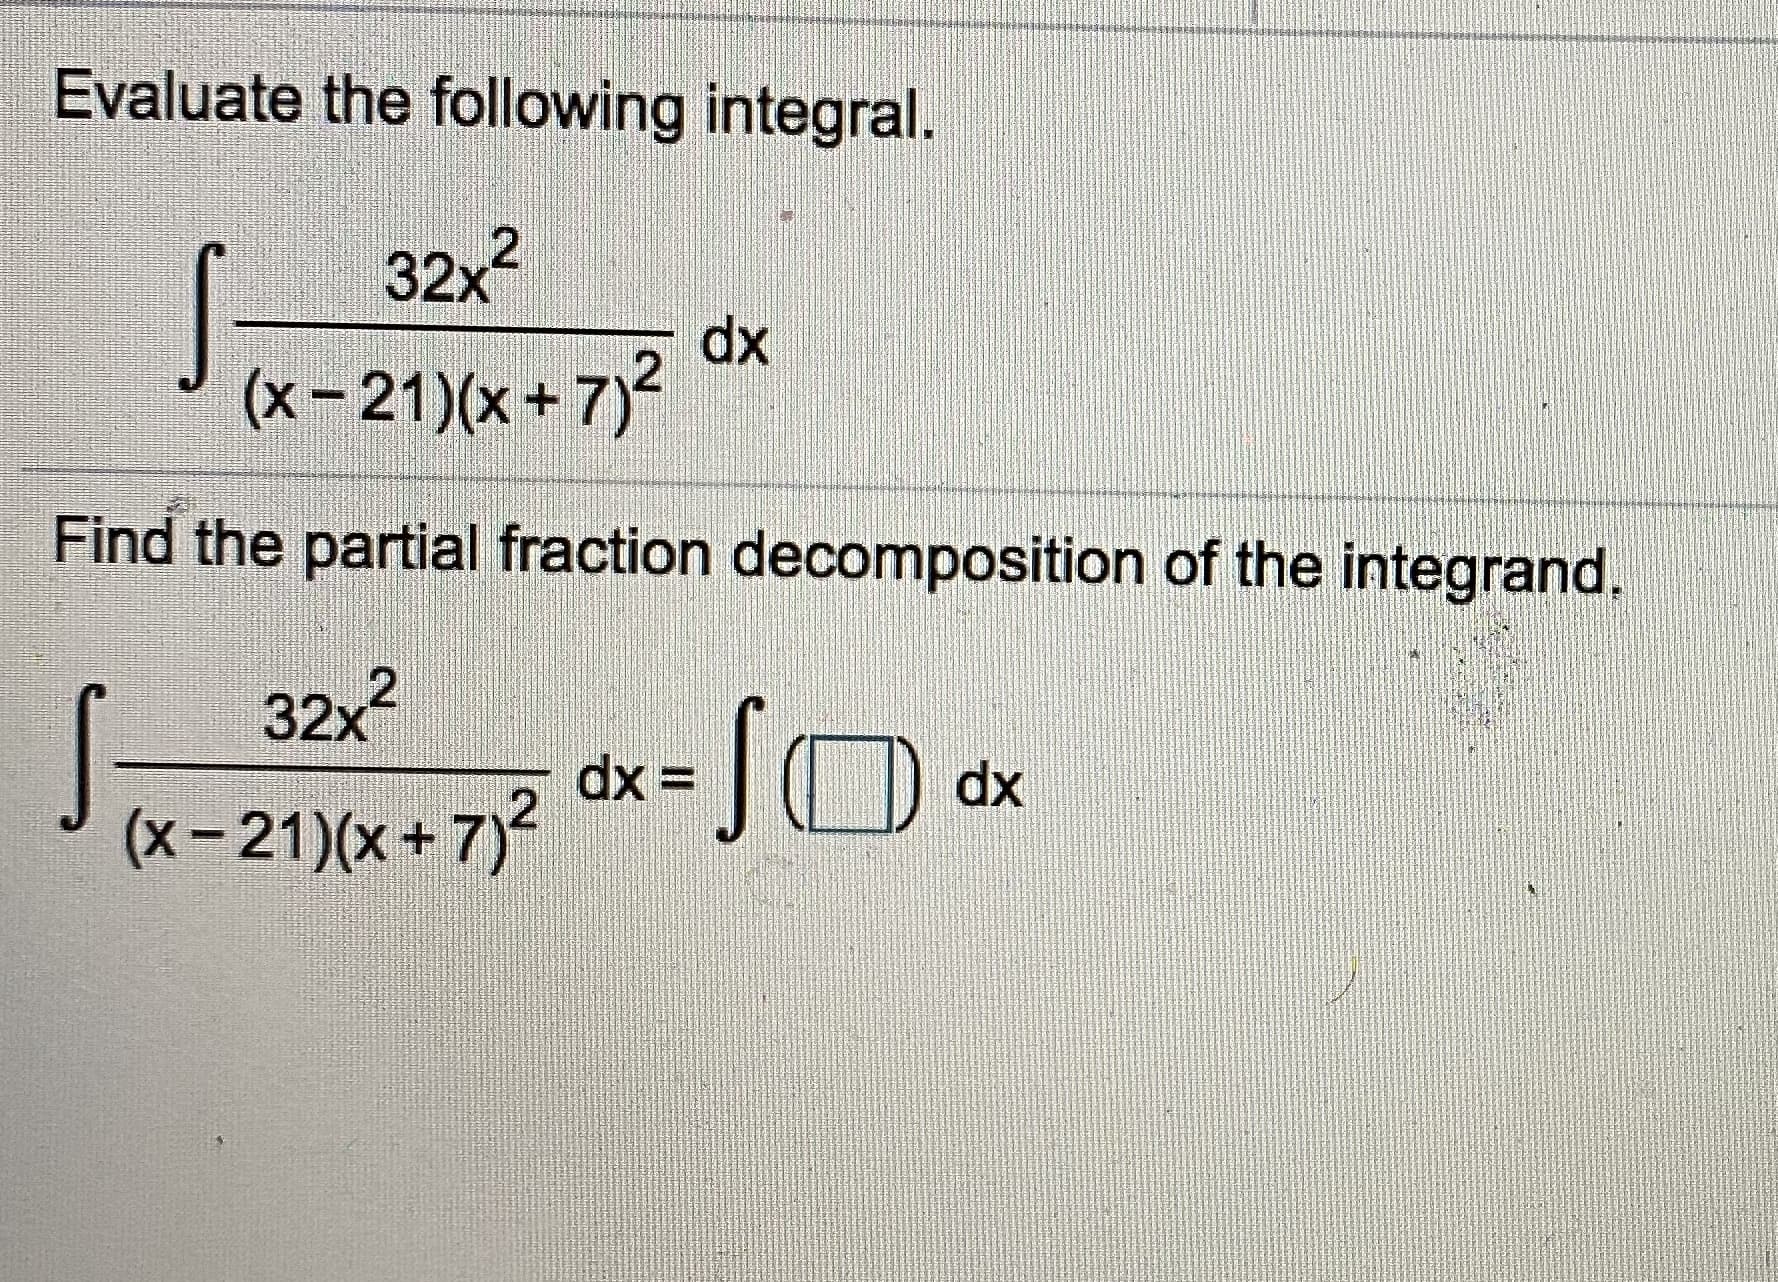 Evaluate the following integral.
32x2
dx
(x-21)(x+7)²
Find the partial fraction decomposition of the integrand.
32x2
Sa
dx =
dx
(x-21)(x+7)
